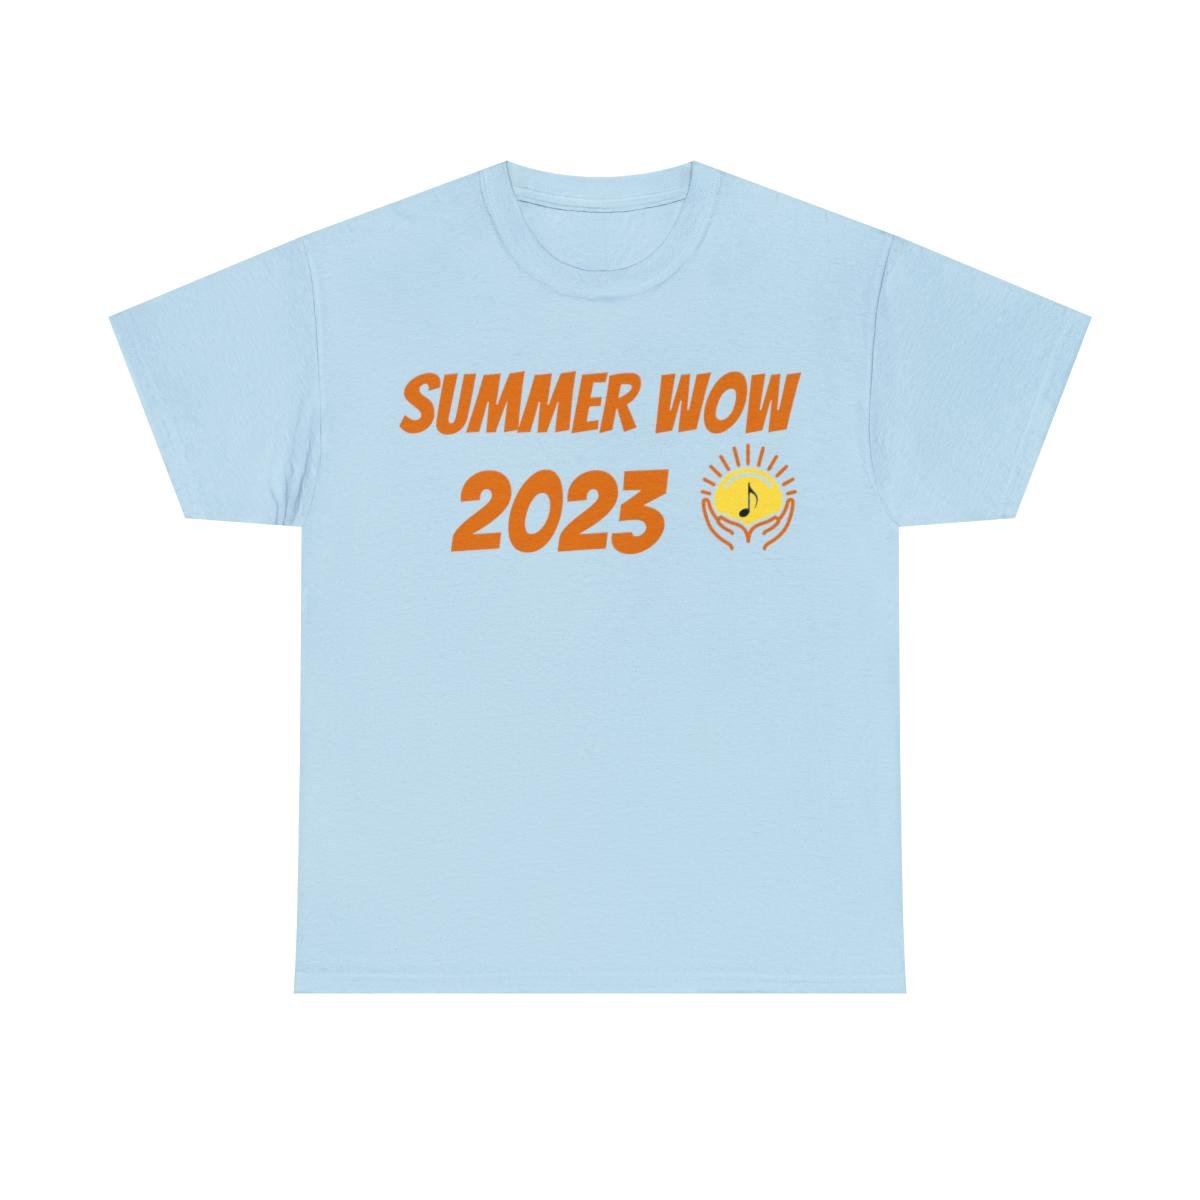 Worship On The Waterfront – Summer WOW 2023 Short Sleeve Tshirt